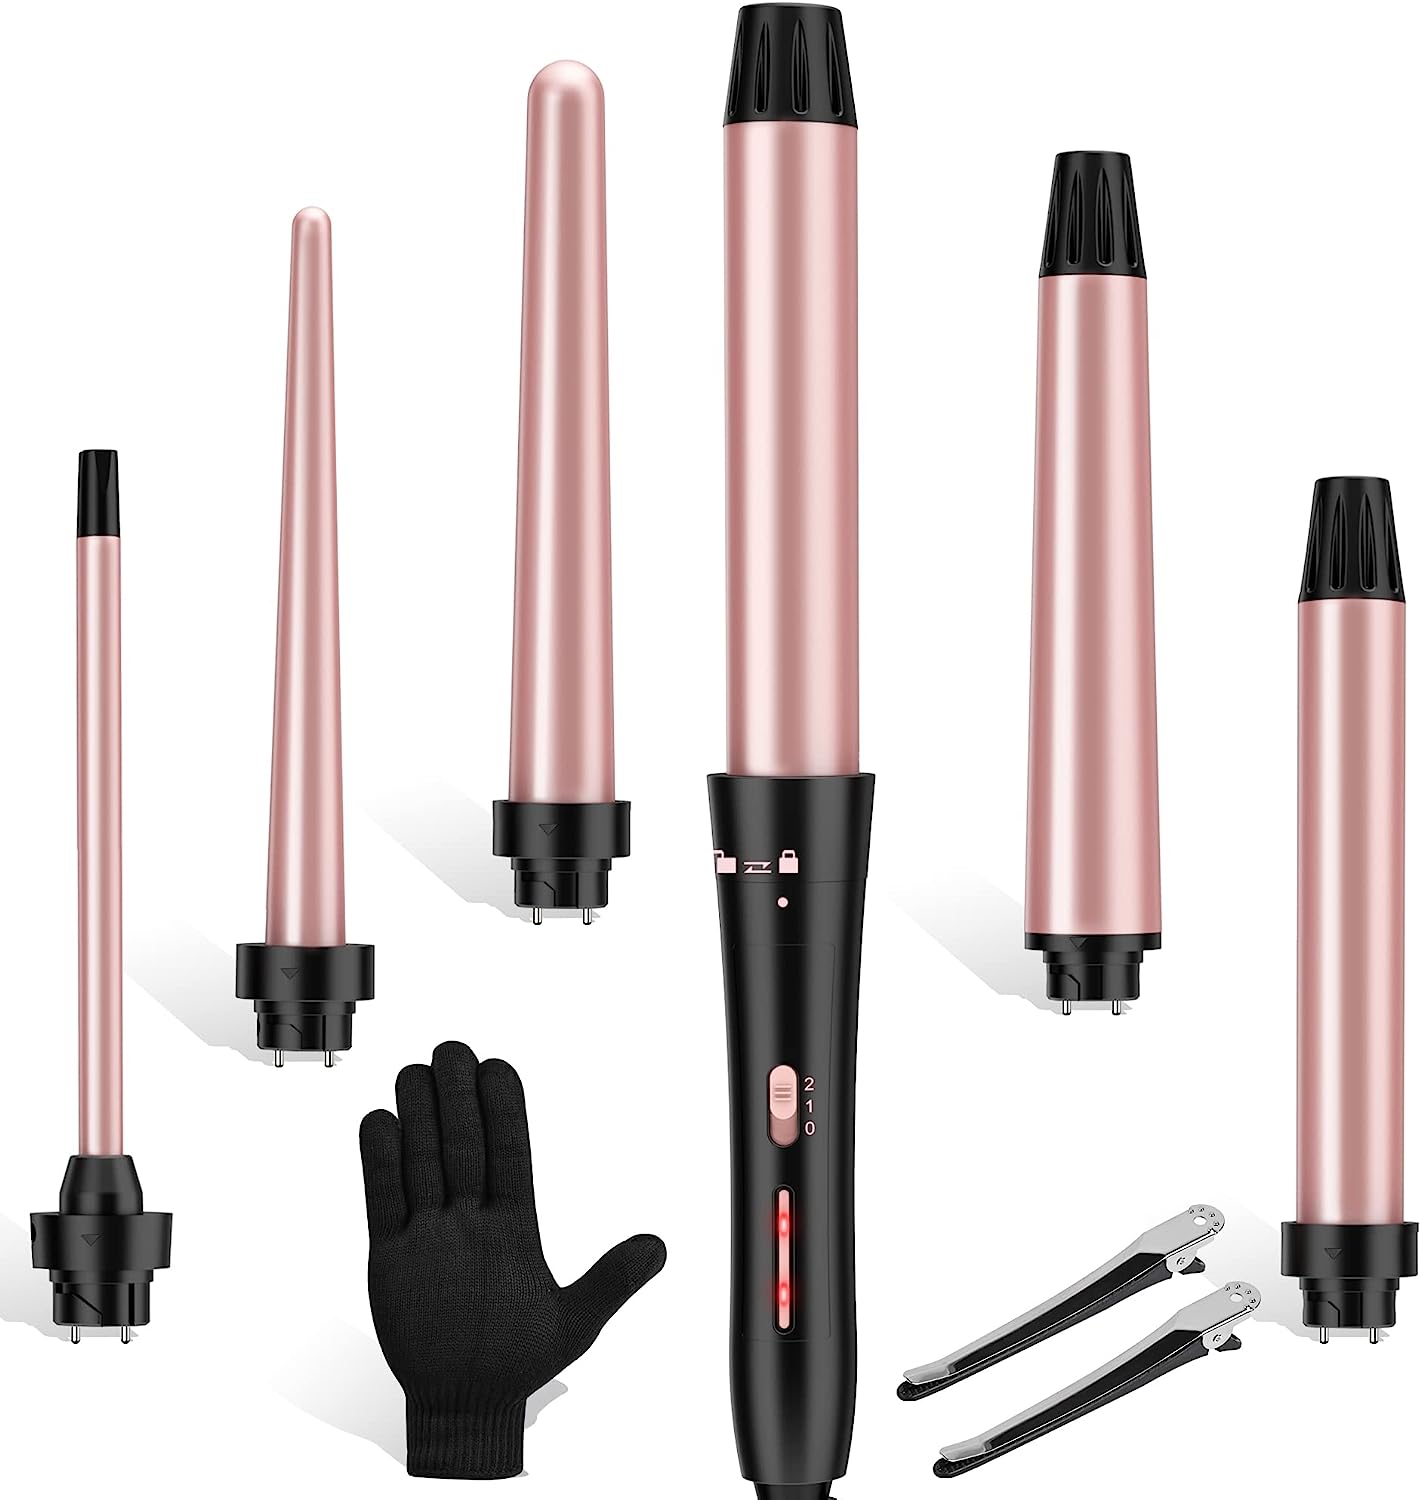 Curling Iron Set, USHOW 6 in 1 Curling Wand Set Hair [...]